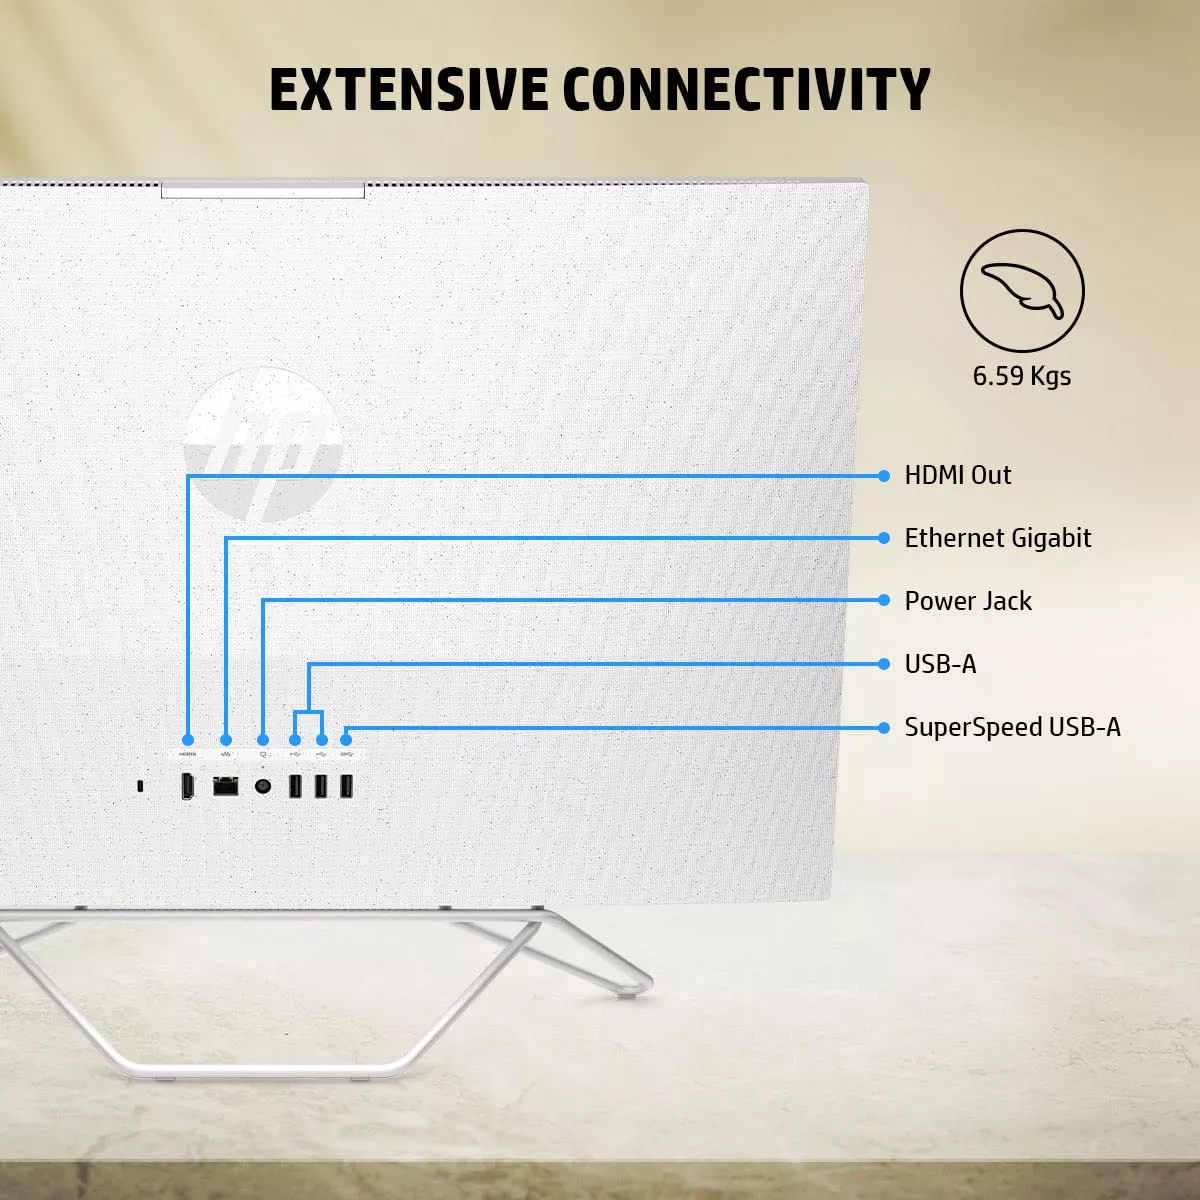 HP All-in-One 12th Gen Intel Core i3 extensive connectivity